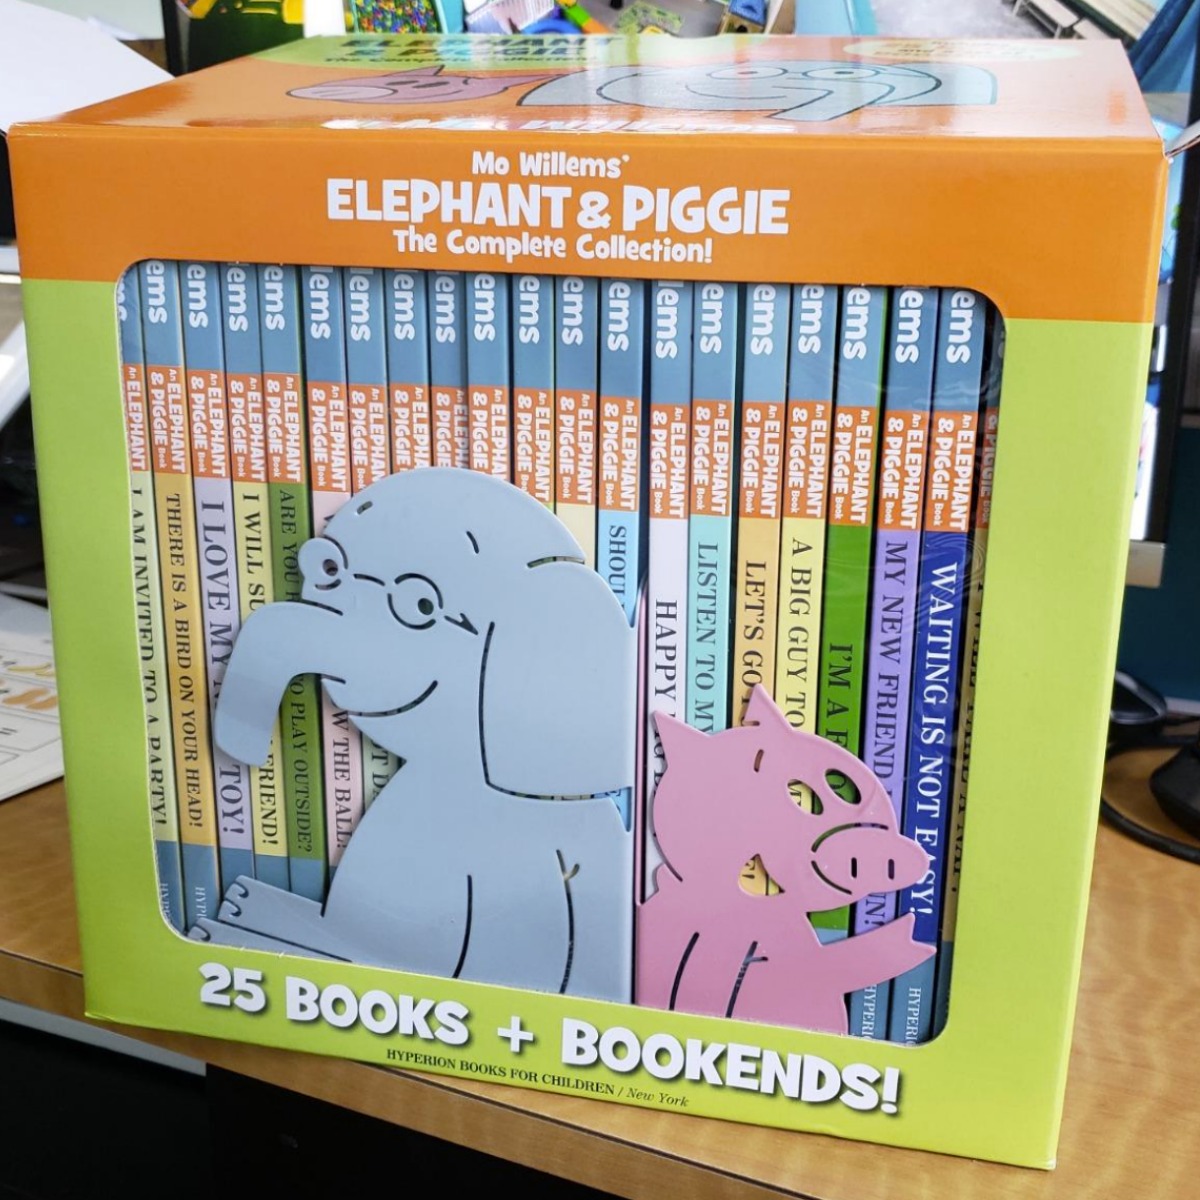 warranty-and-free-shipping-hardcover-2011-elephant-piggie-bundle-by